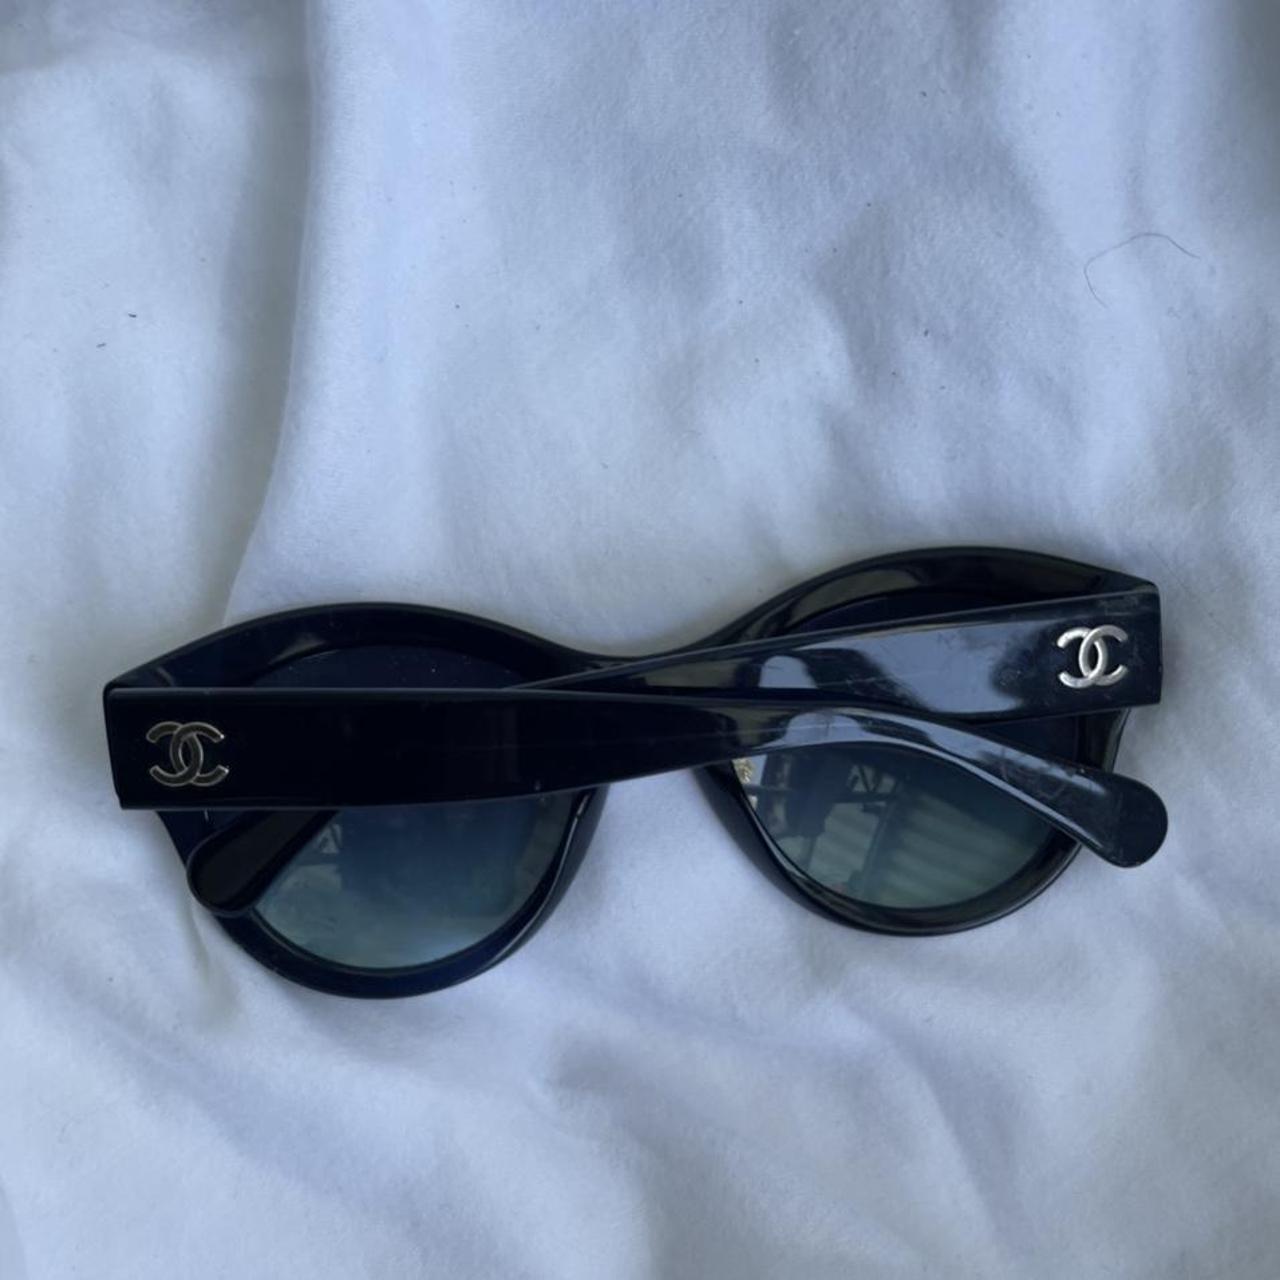 Chanel sunglasses Worn once cereal number is 5371 - Depop